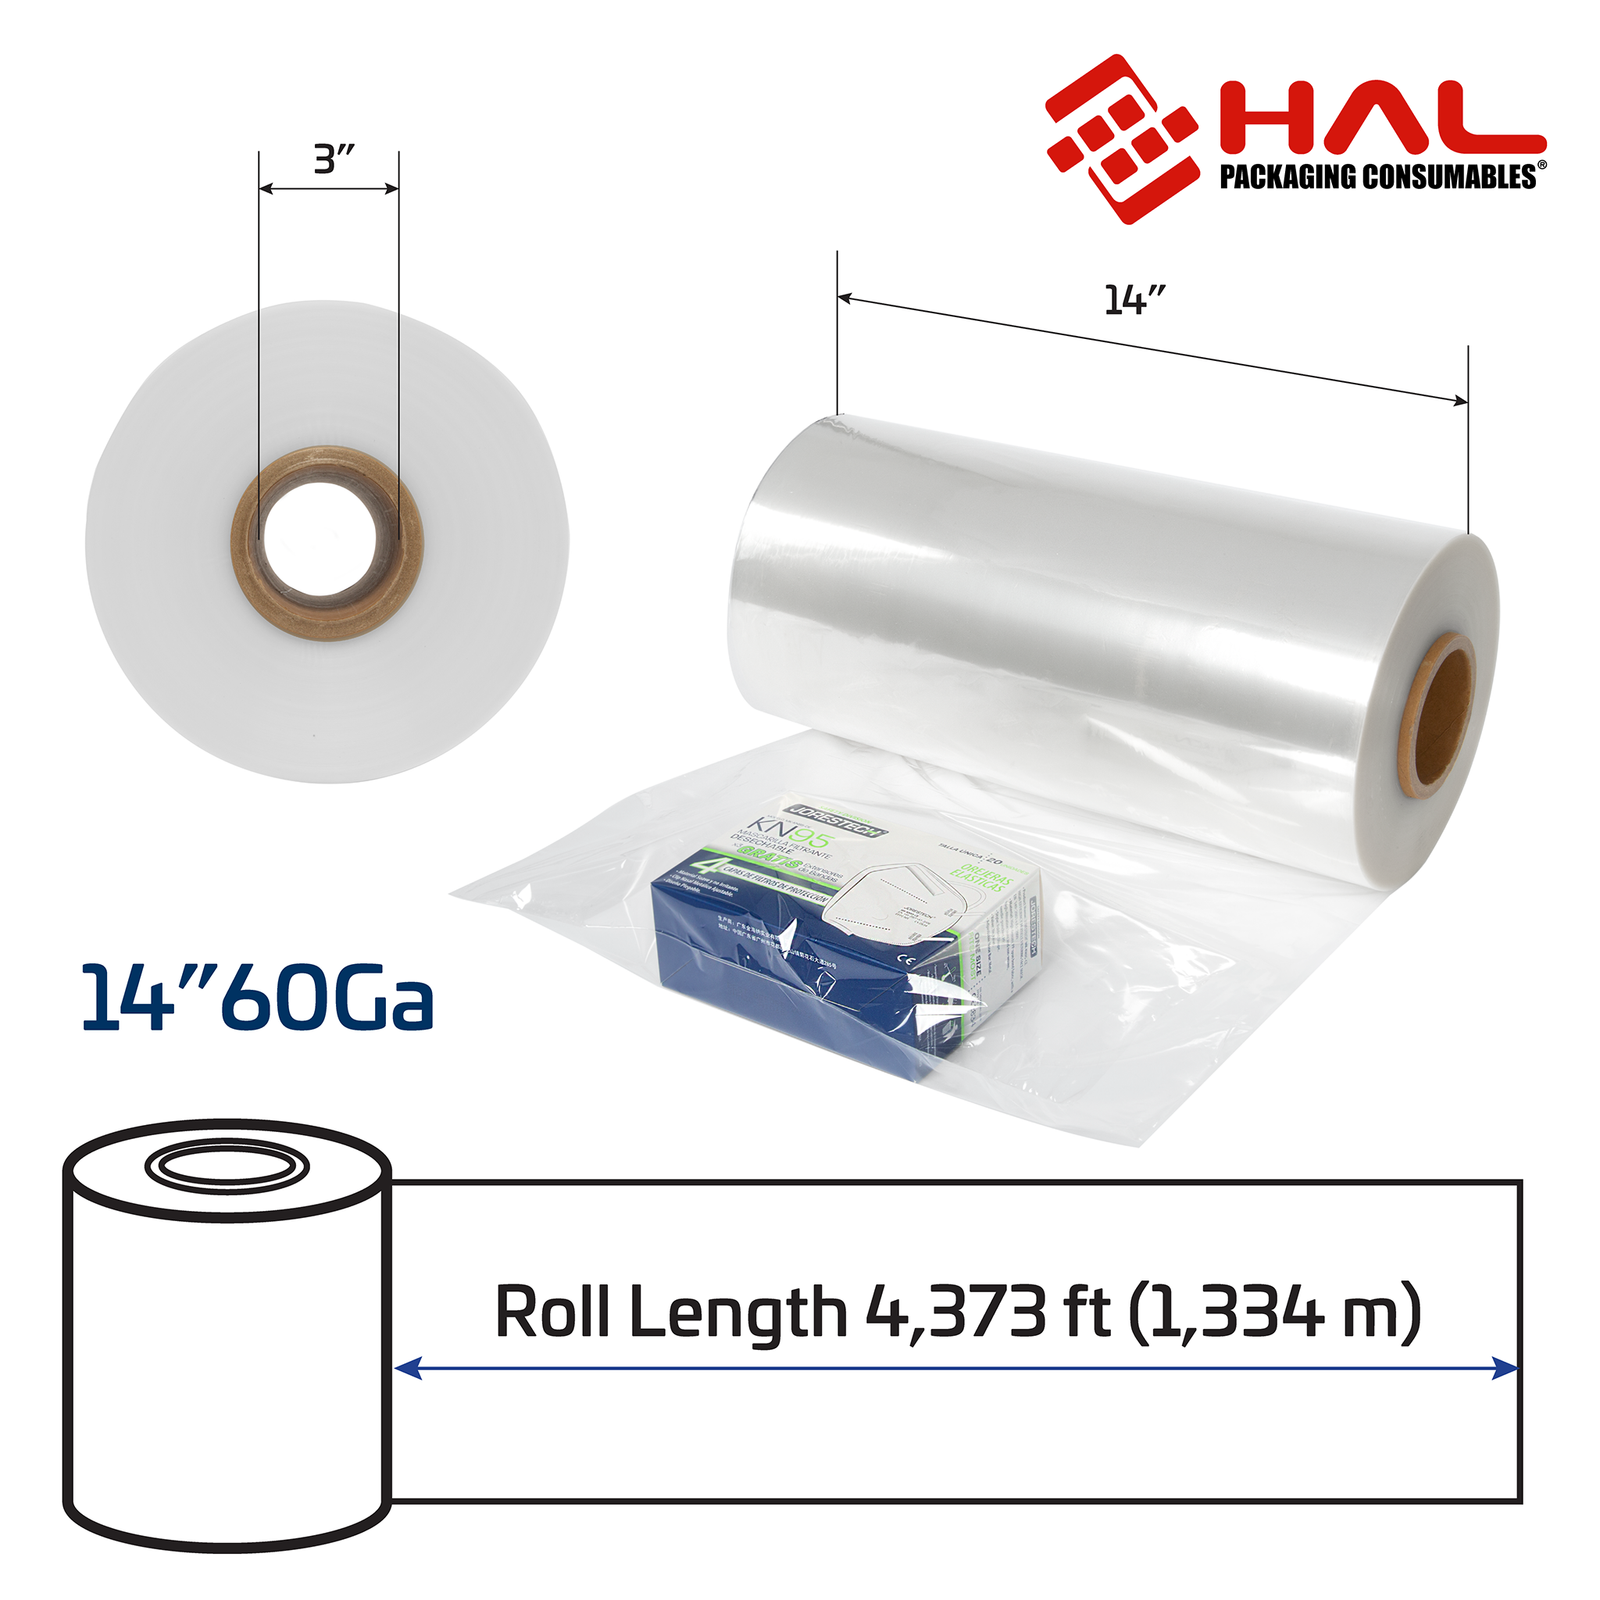 Measurements of the 60 gauge shrink wrapping film tube. 3 inch diameter of the inner core, and 14 inch width with a 4,373 ft. length.